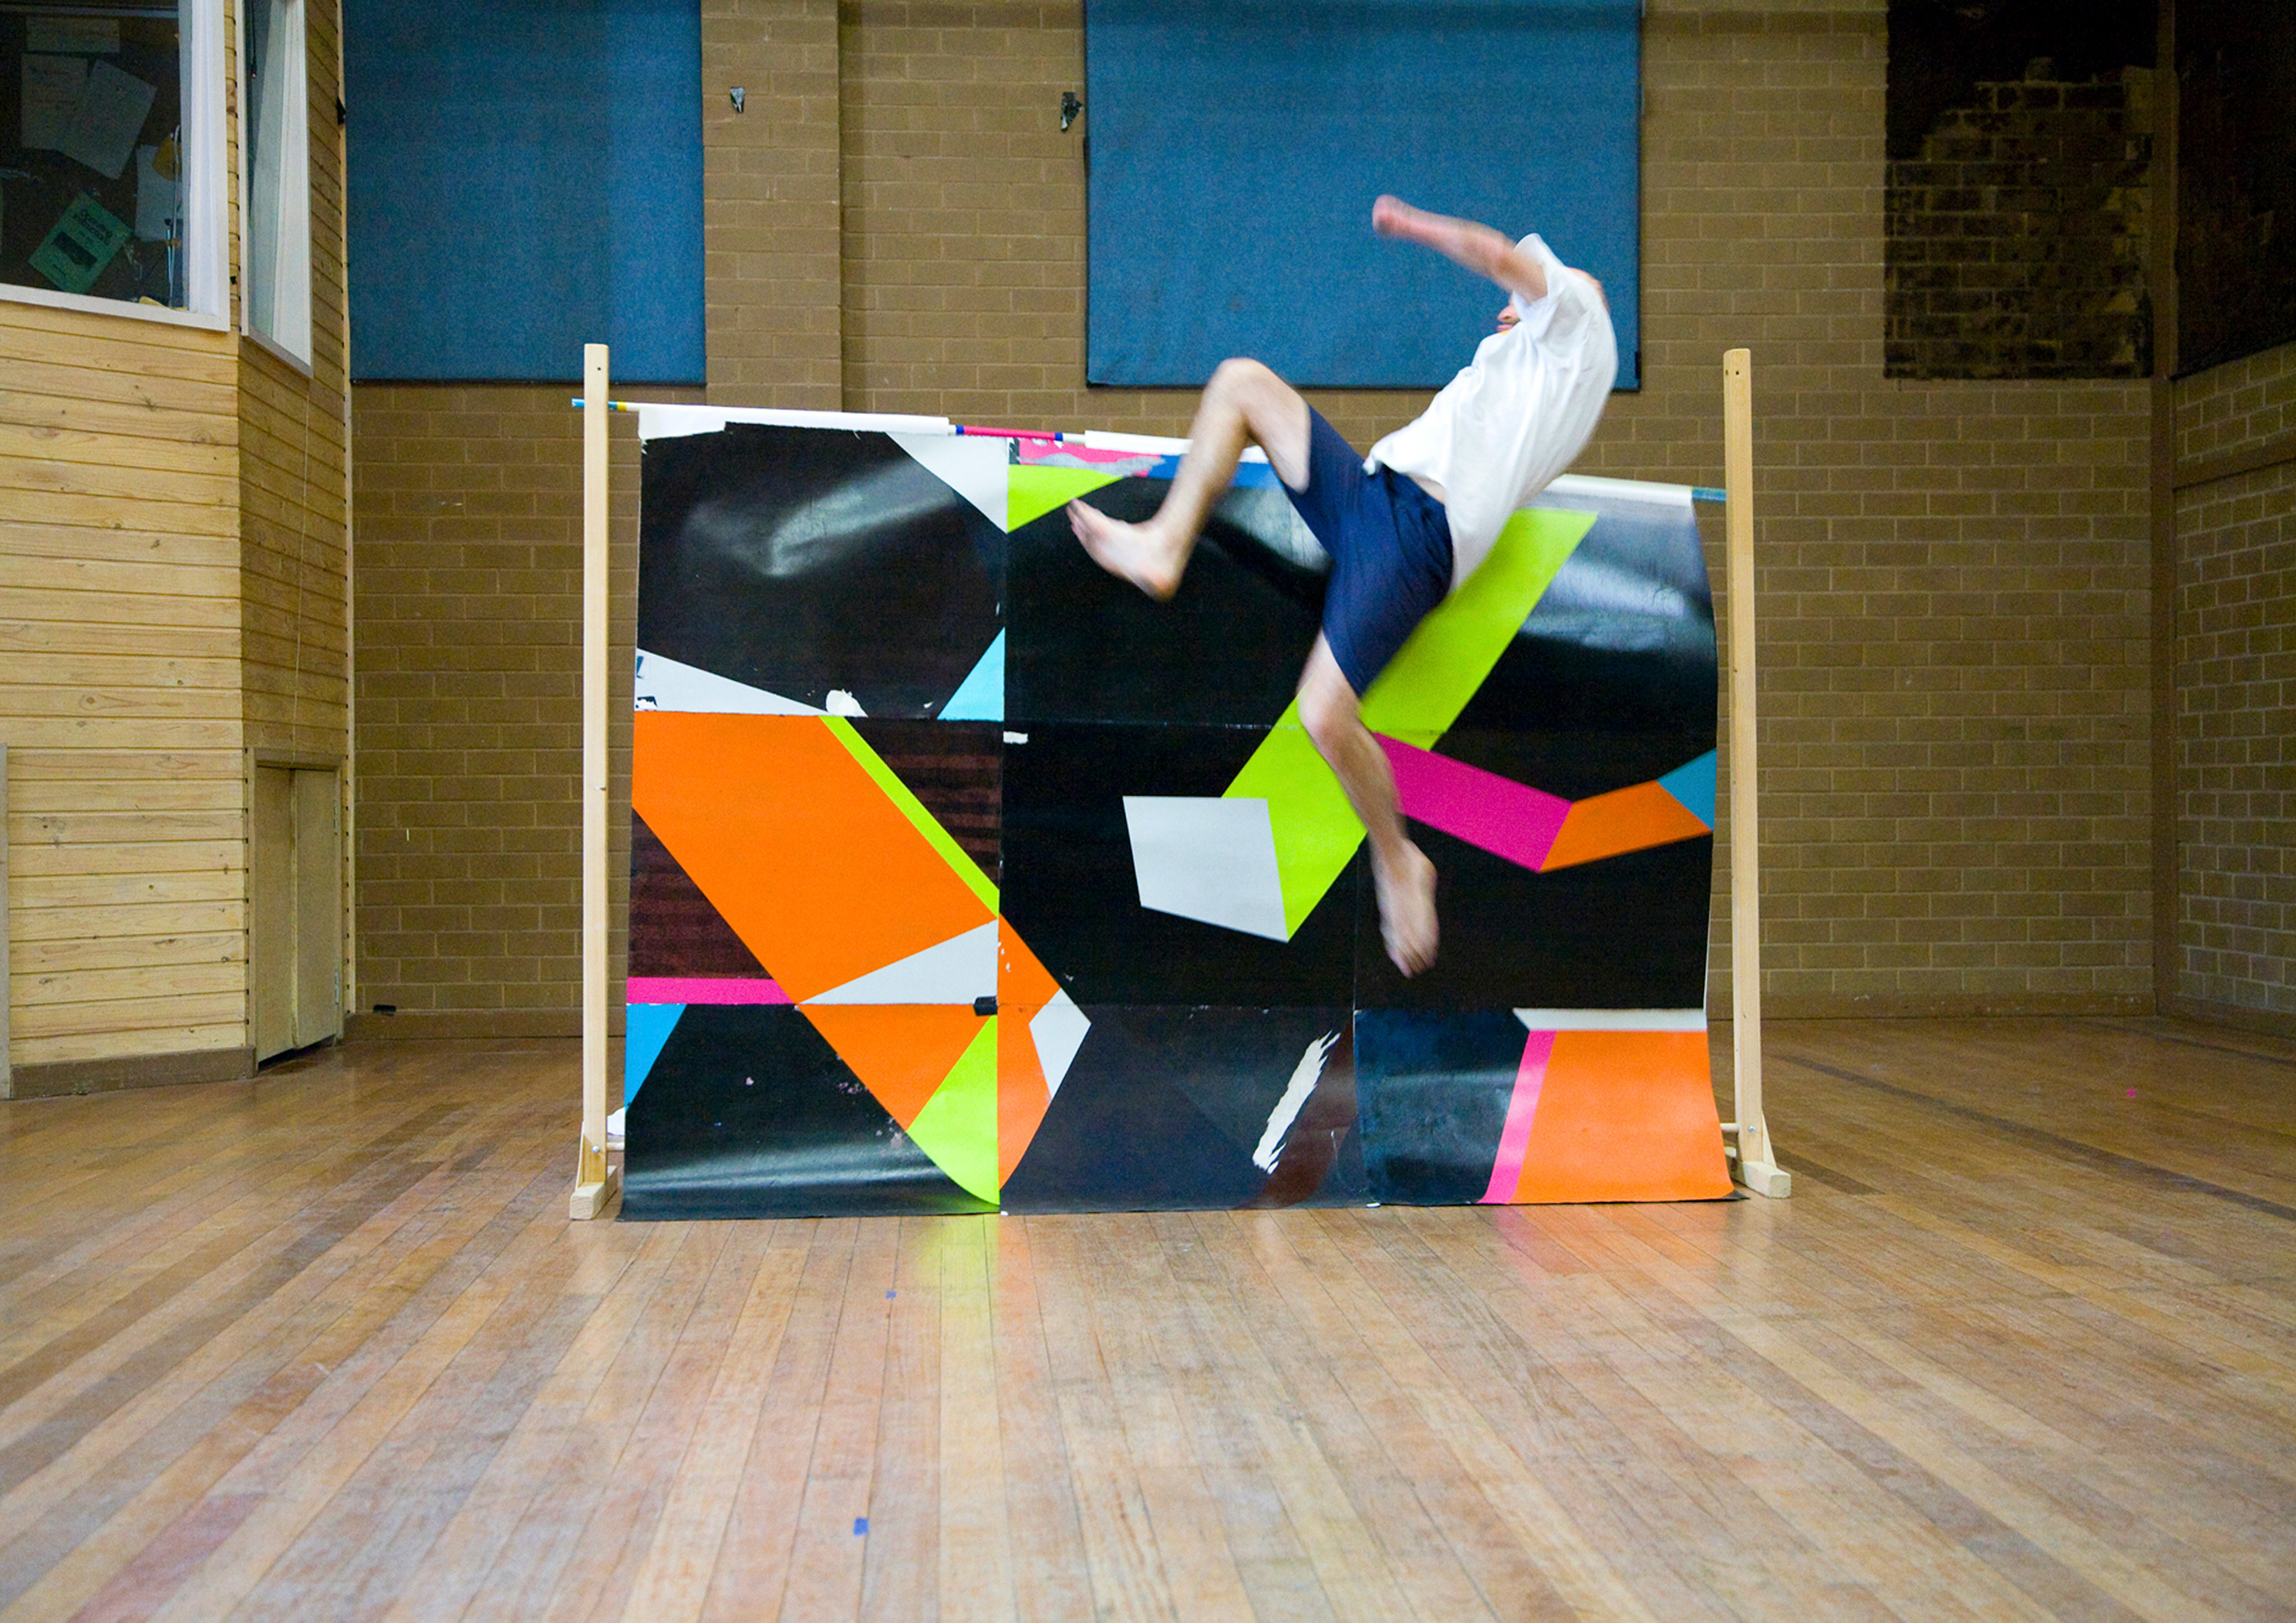 A photograph of a man jumping over a screen with a bright abstract pattern in a school gymnasium,